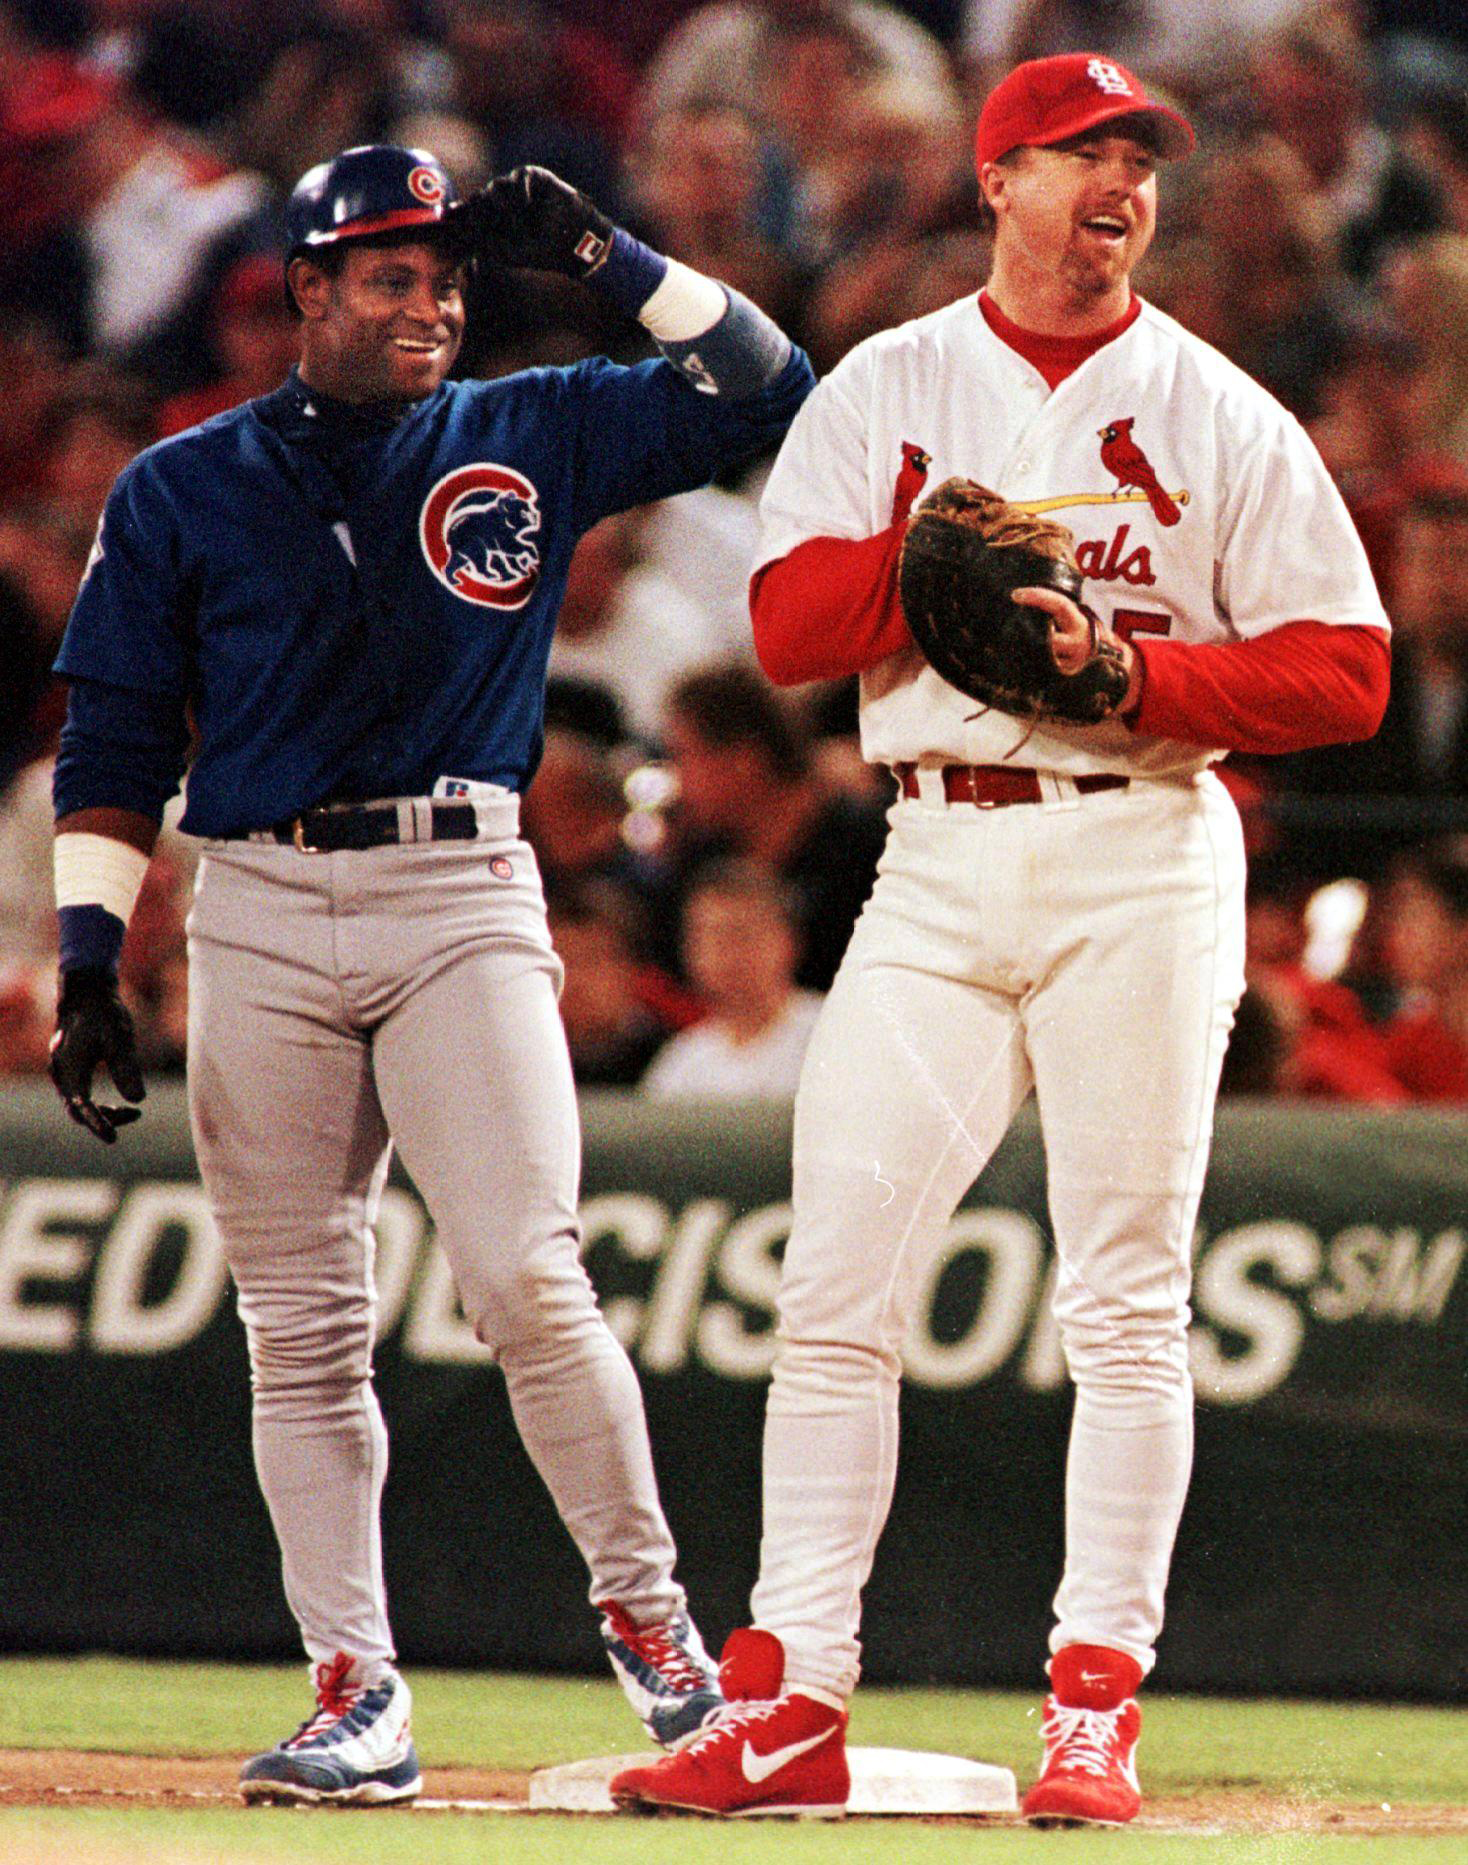 Chicago Cubs' Sammy Sosa (L), shares a laugh with St. Louis Cardinals' first baseman Mark McGwire (R), after receiving a walk in the third inning. McGwire stayed at 63 home runs and Sosa stayed at 62 as neither had a home run in the 3-2 Chicago victory.